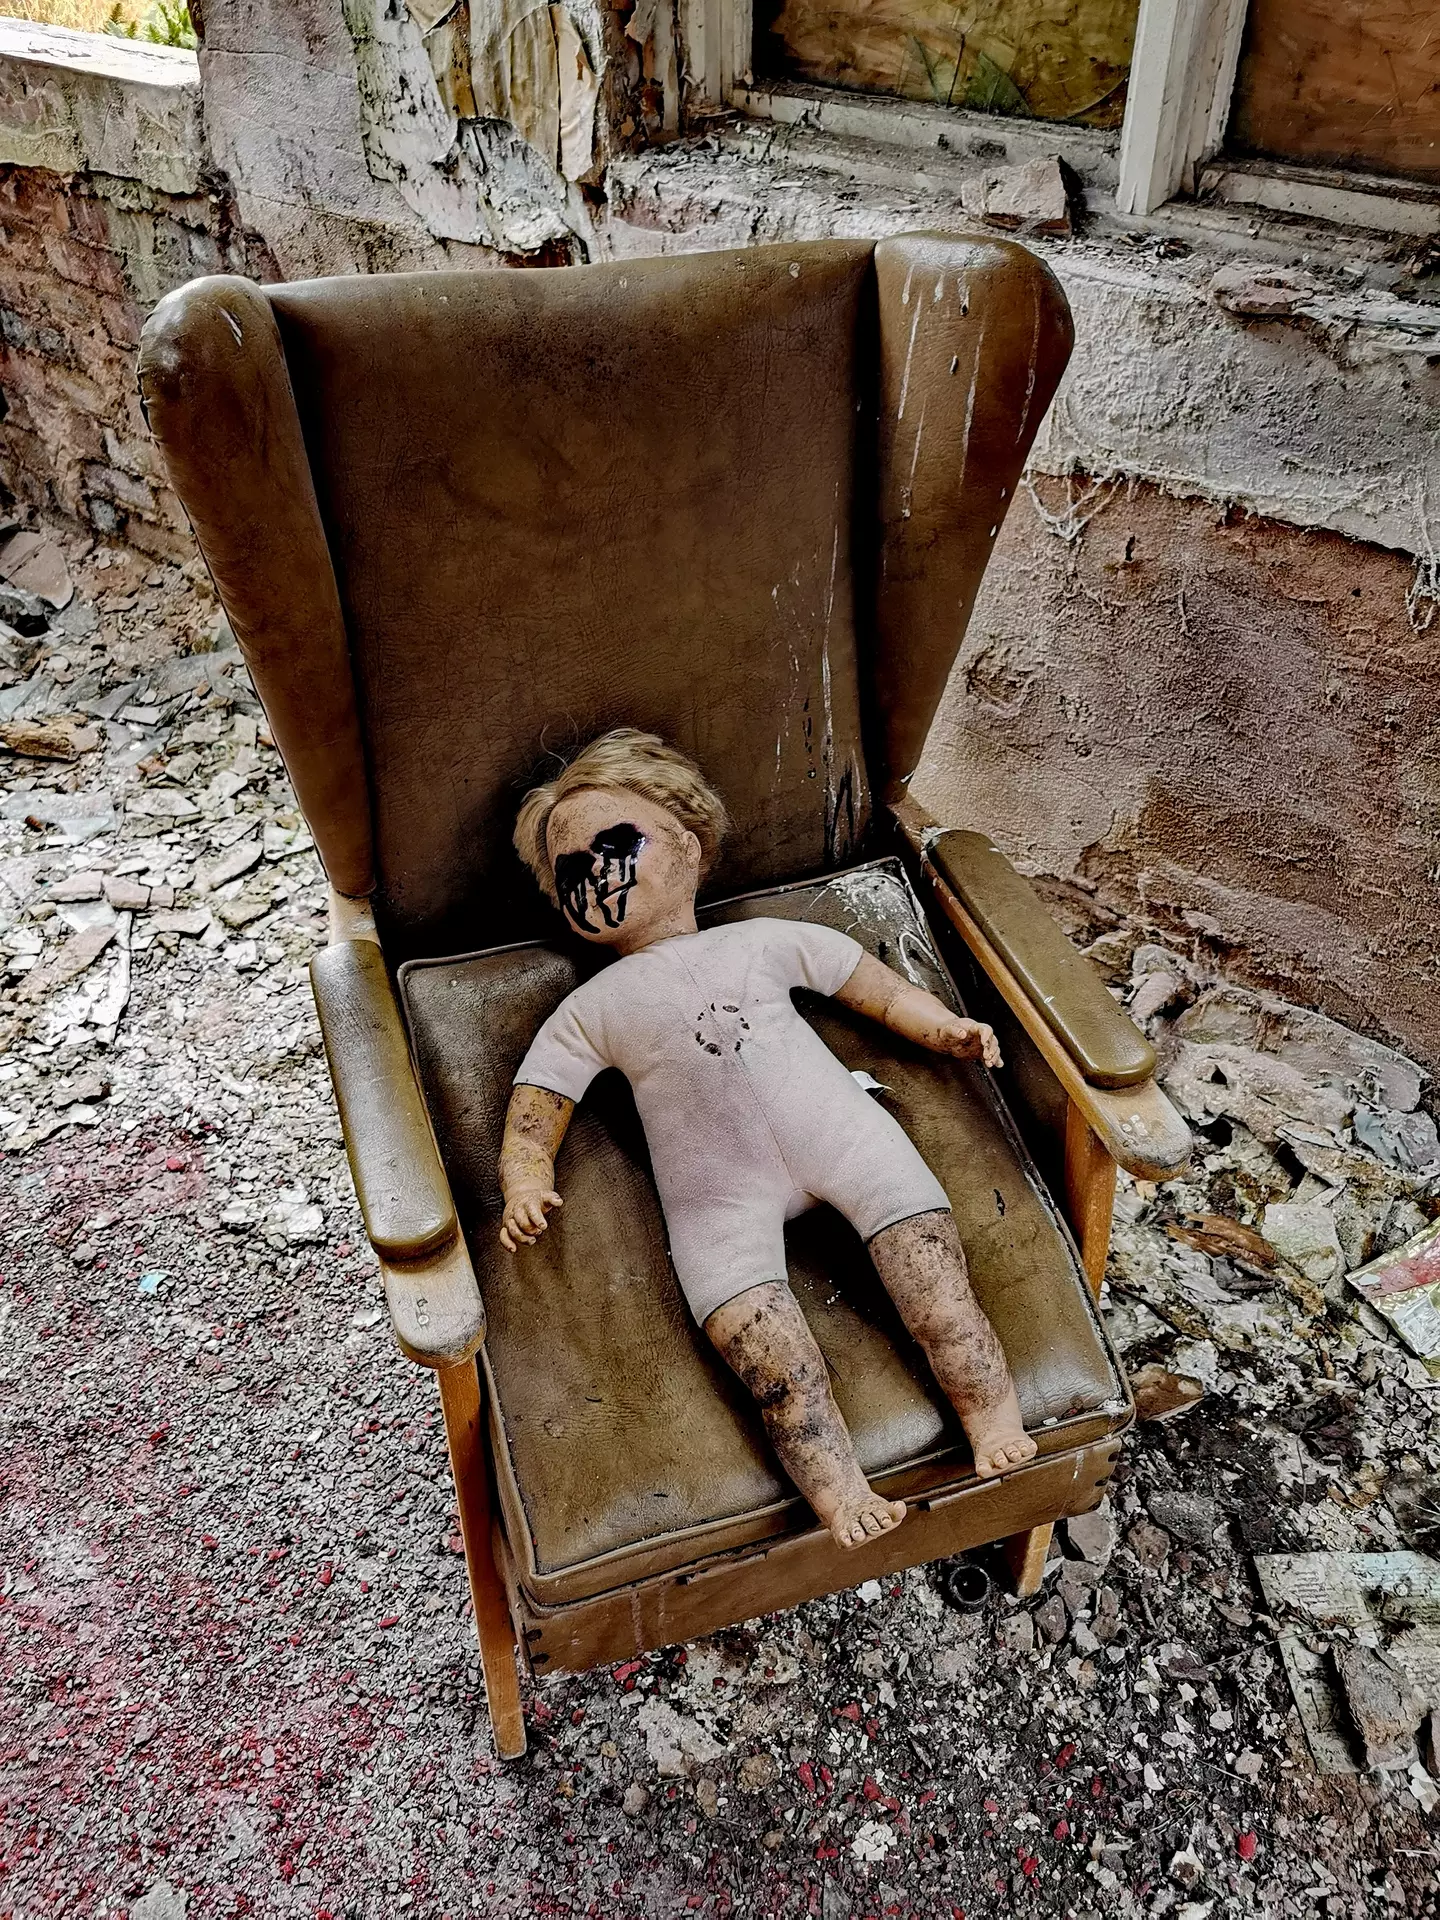 Kyle found a seriously creepy doll lurking in the abandoned hospital.